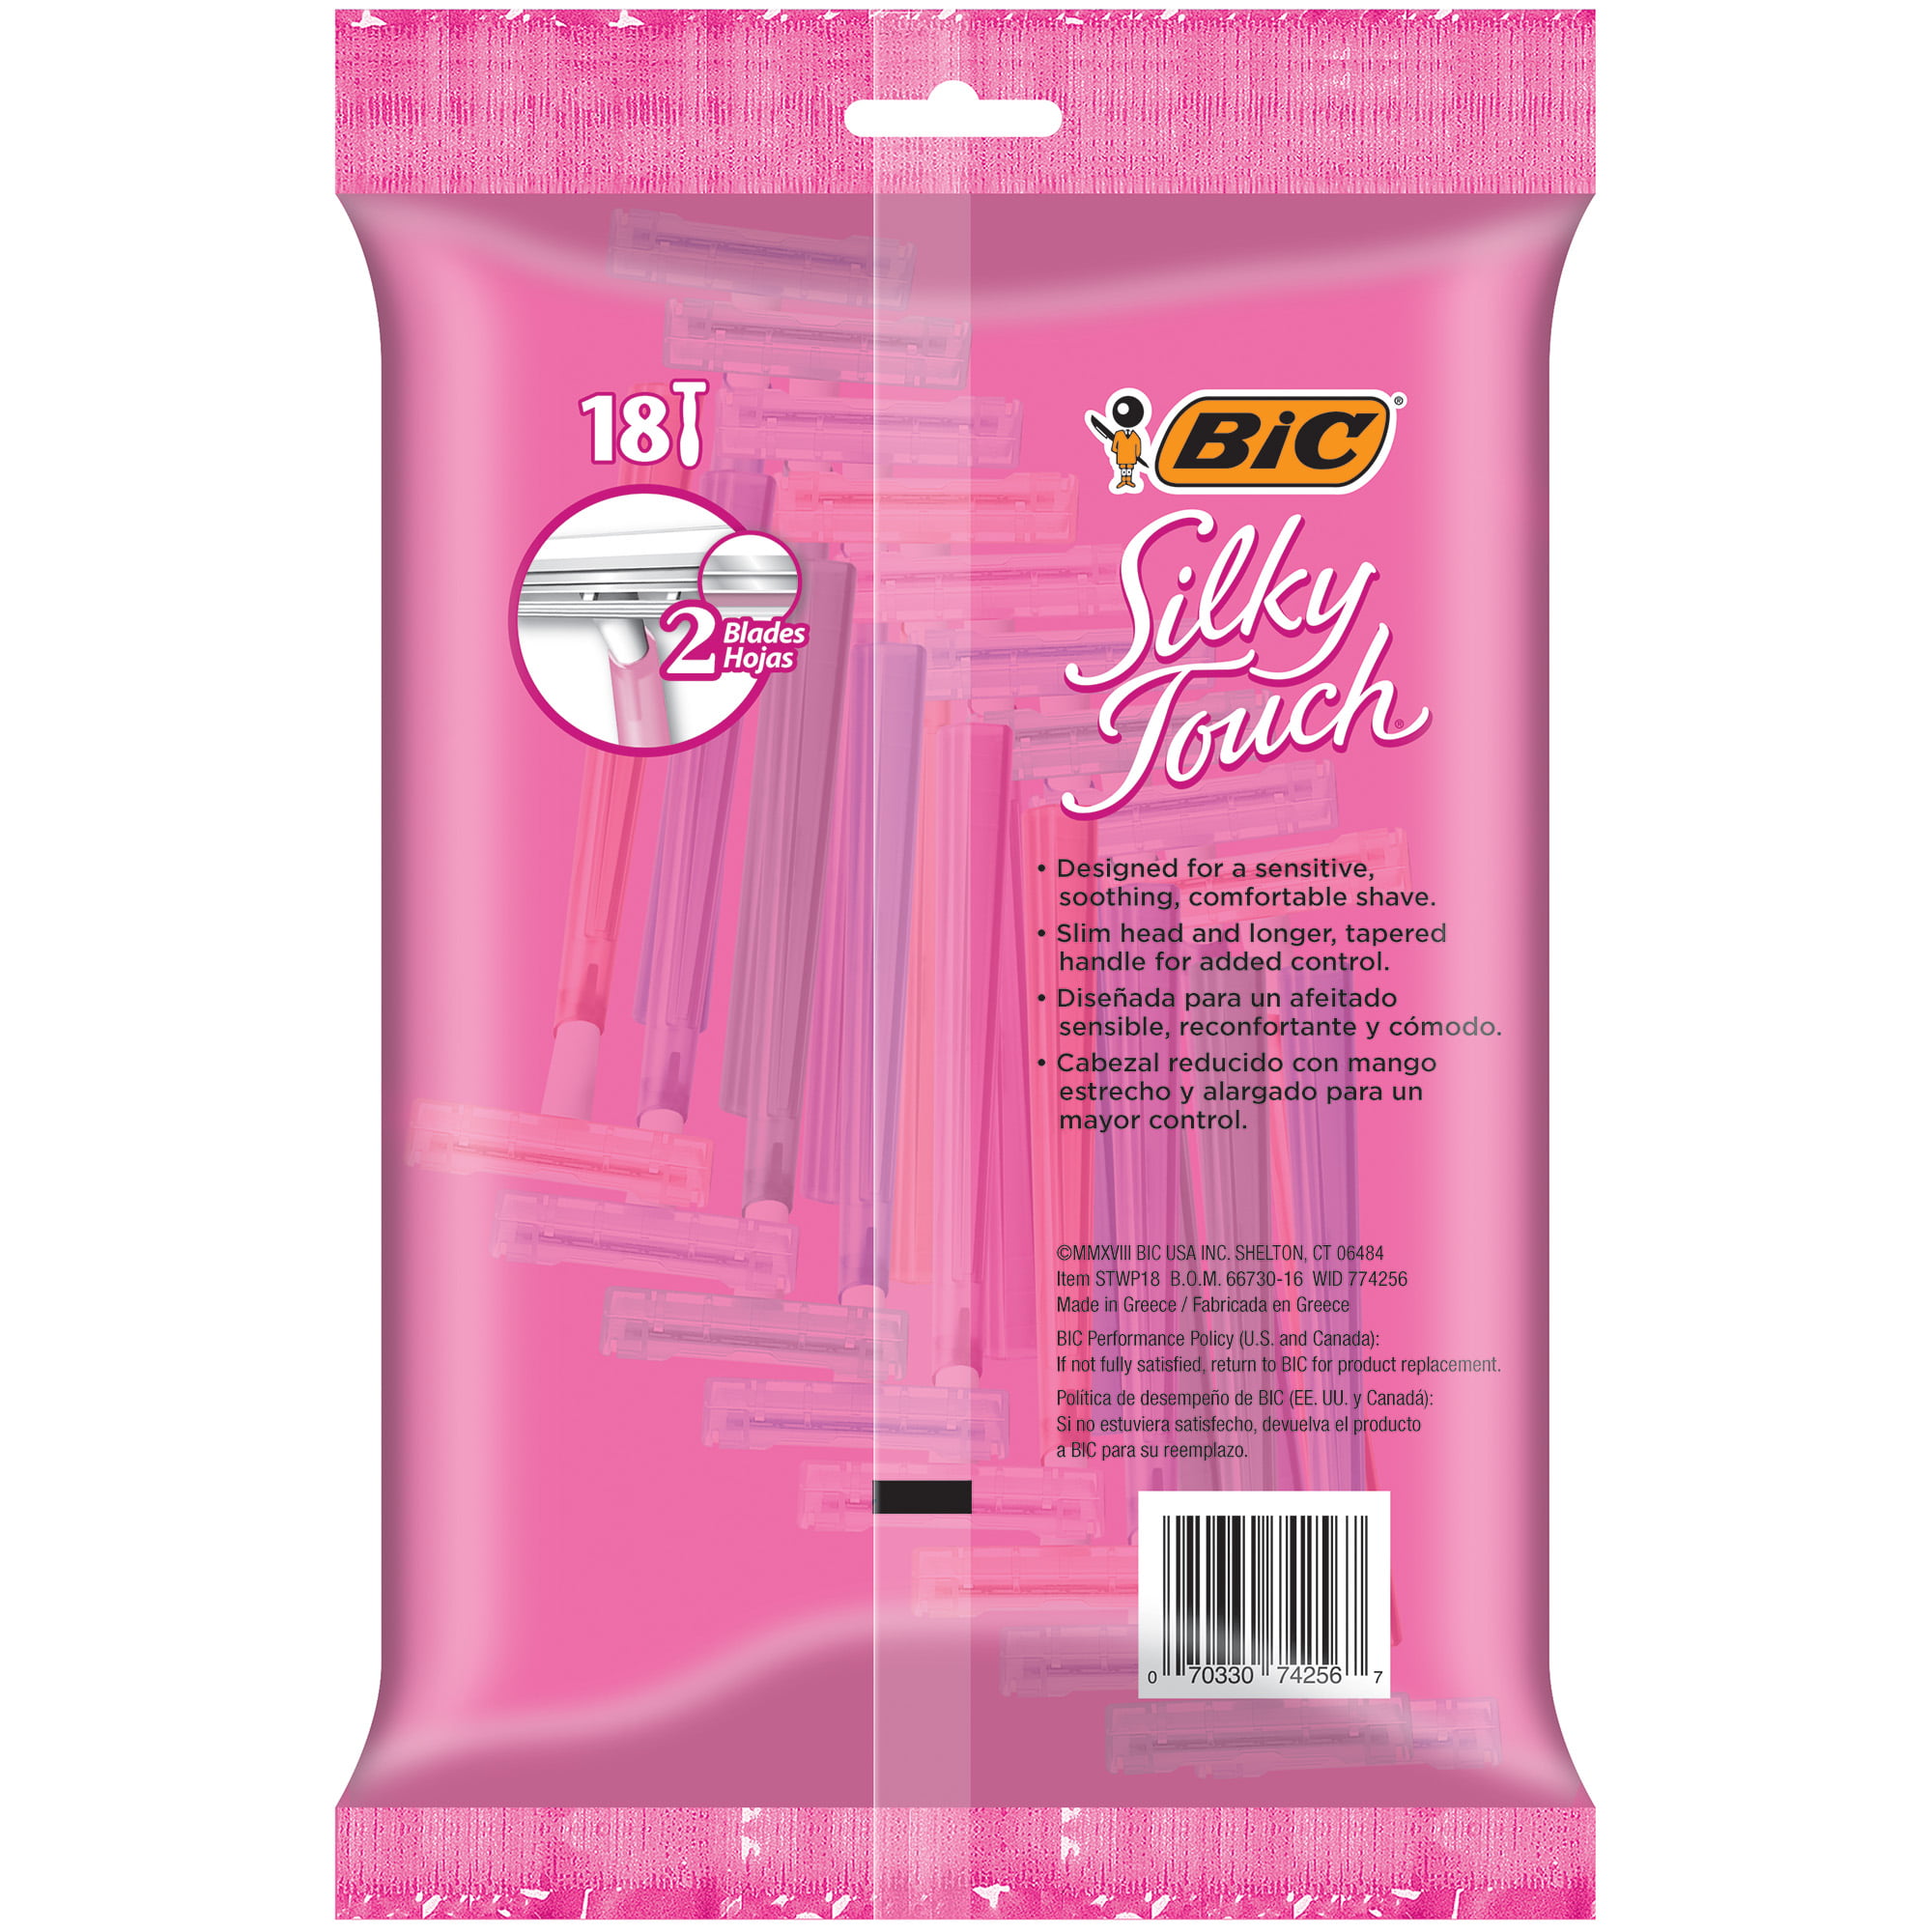 BIC Silky Touch Women's Razors, 18 Pack